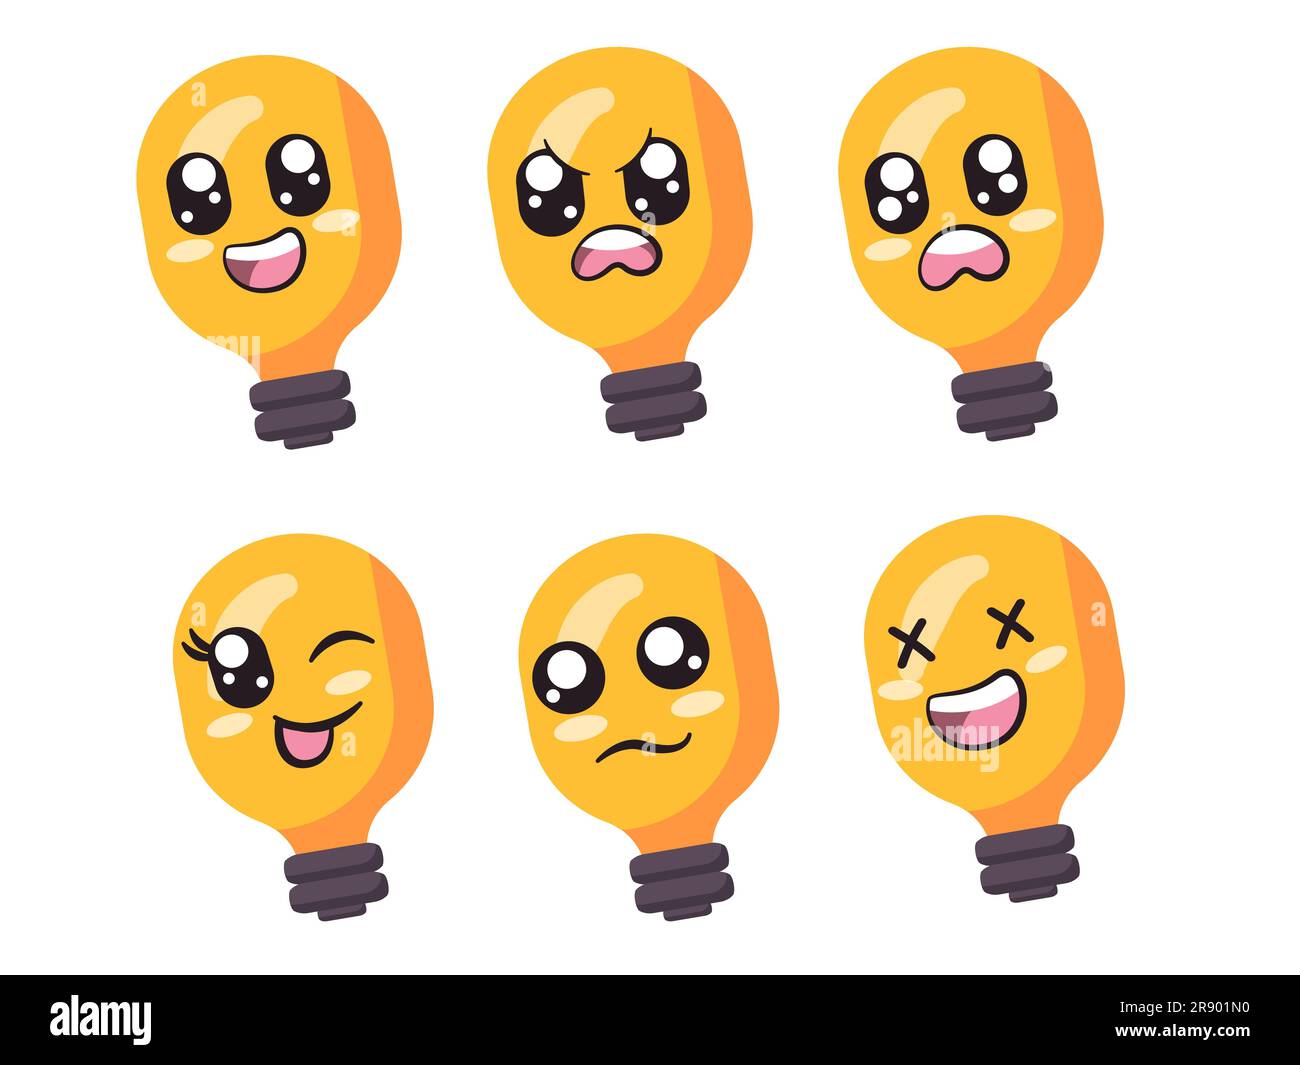 lightbulb electricity lamp energy power yellow bright with big smile angry afraid blinking eye sad and laughing expression feeling emotion Stock Vector